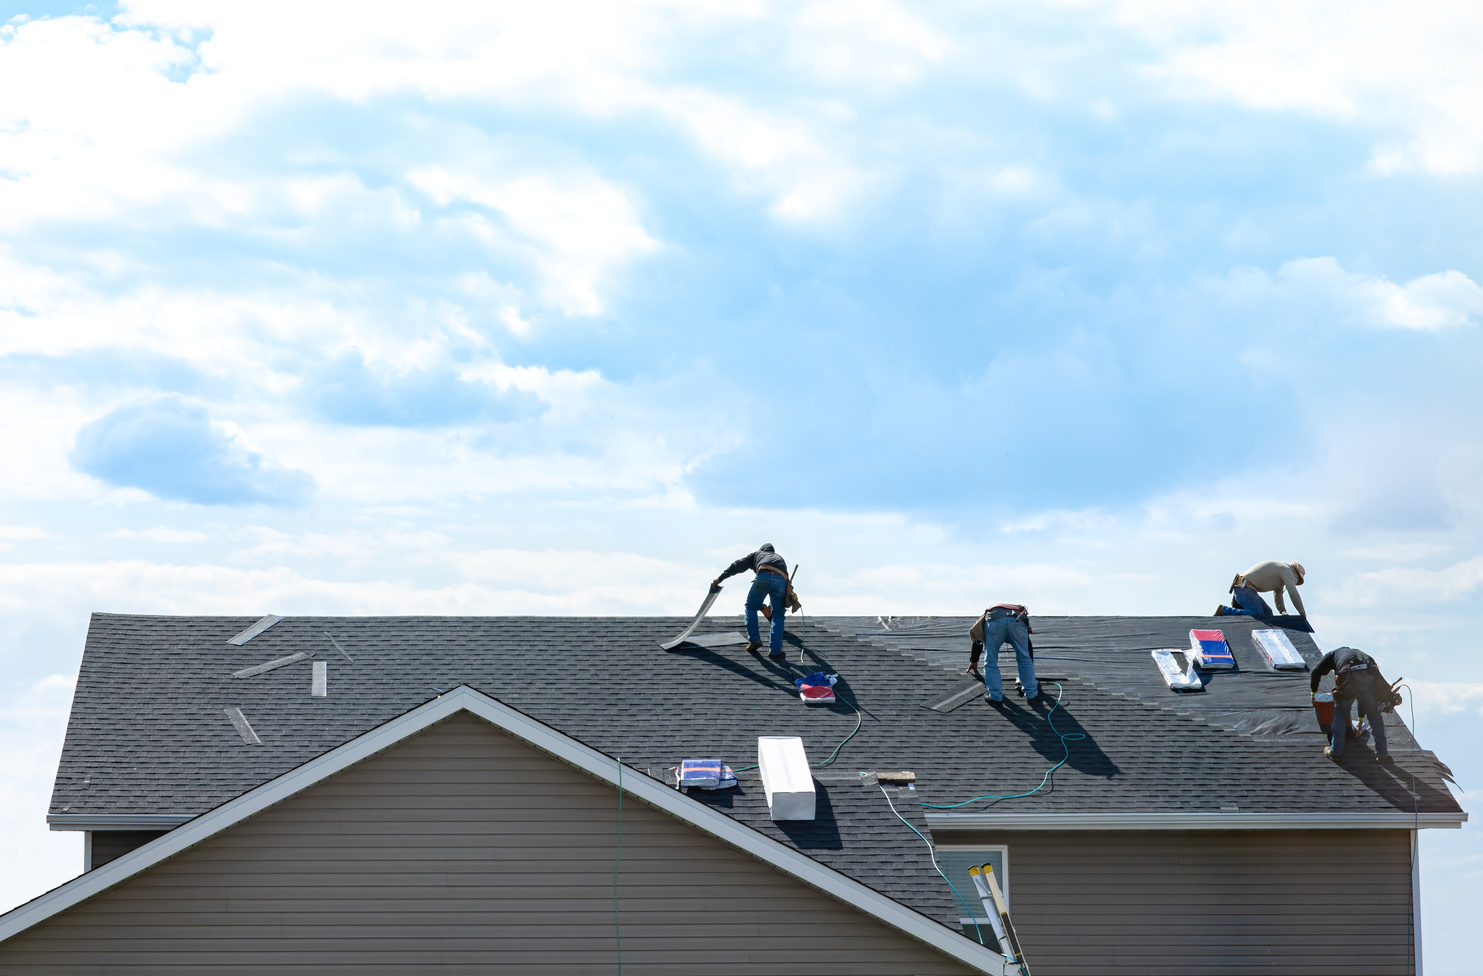 4 construction workers fixing roof against clouds blue sky, install shingles at the top of the house.